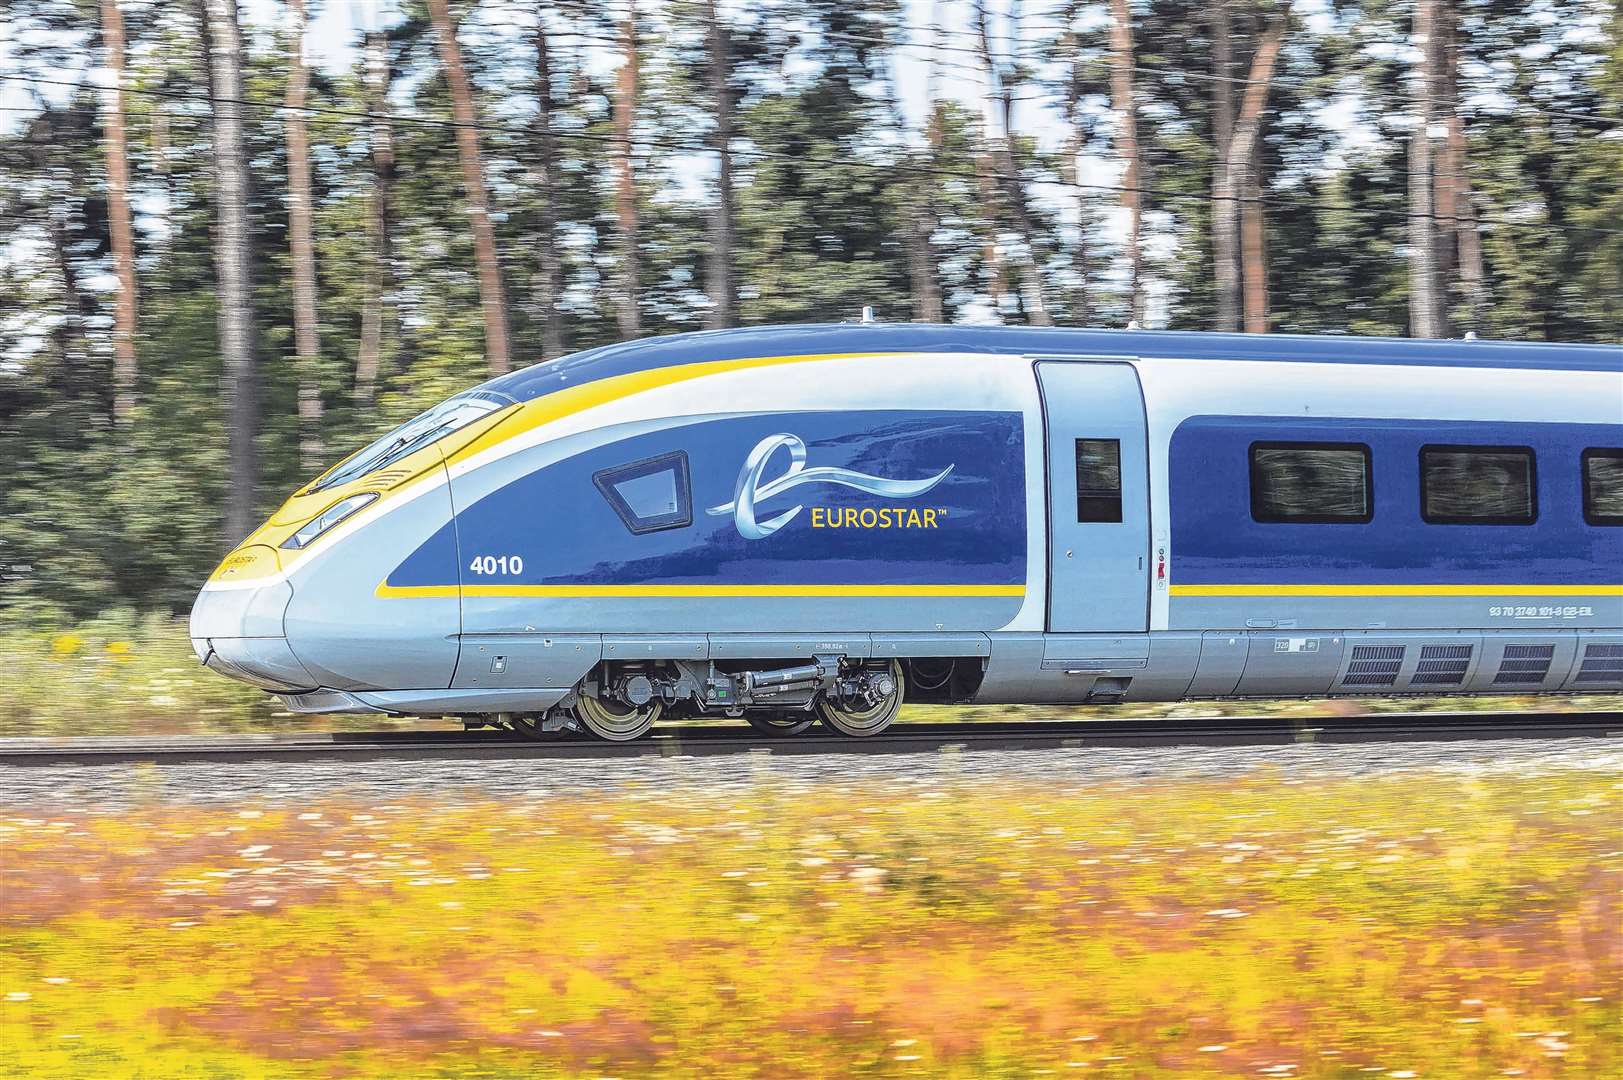 Could Eurostar face competition for the first time since its launch in 1994?